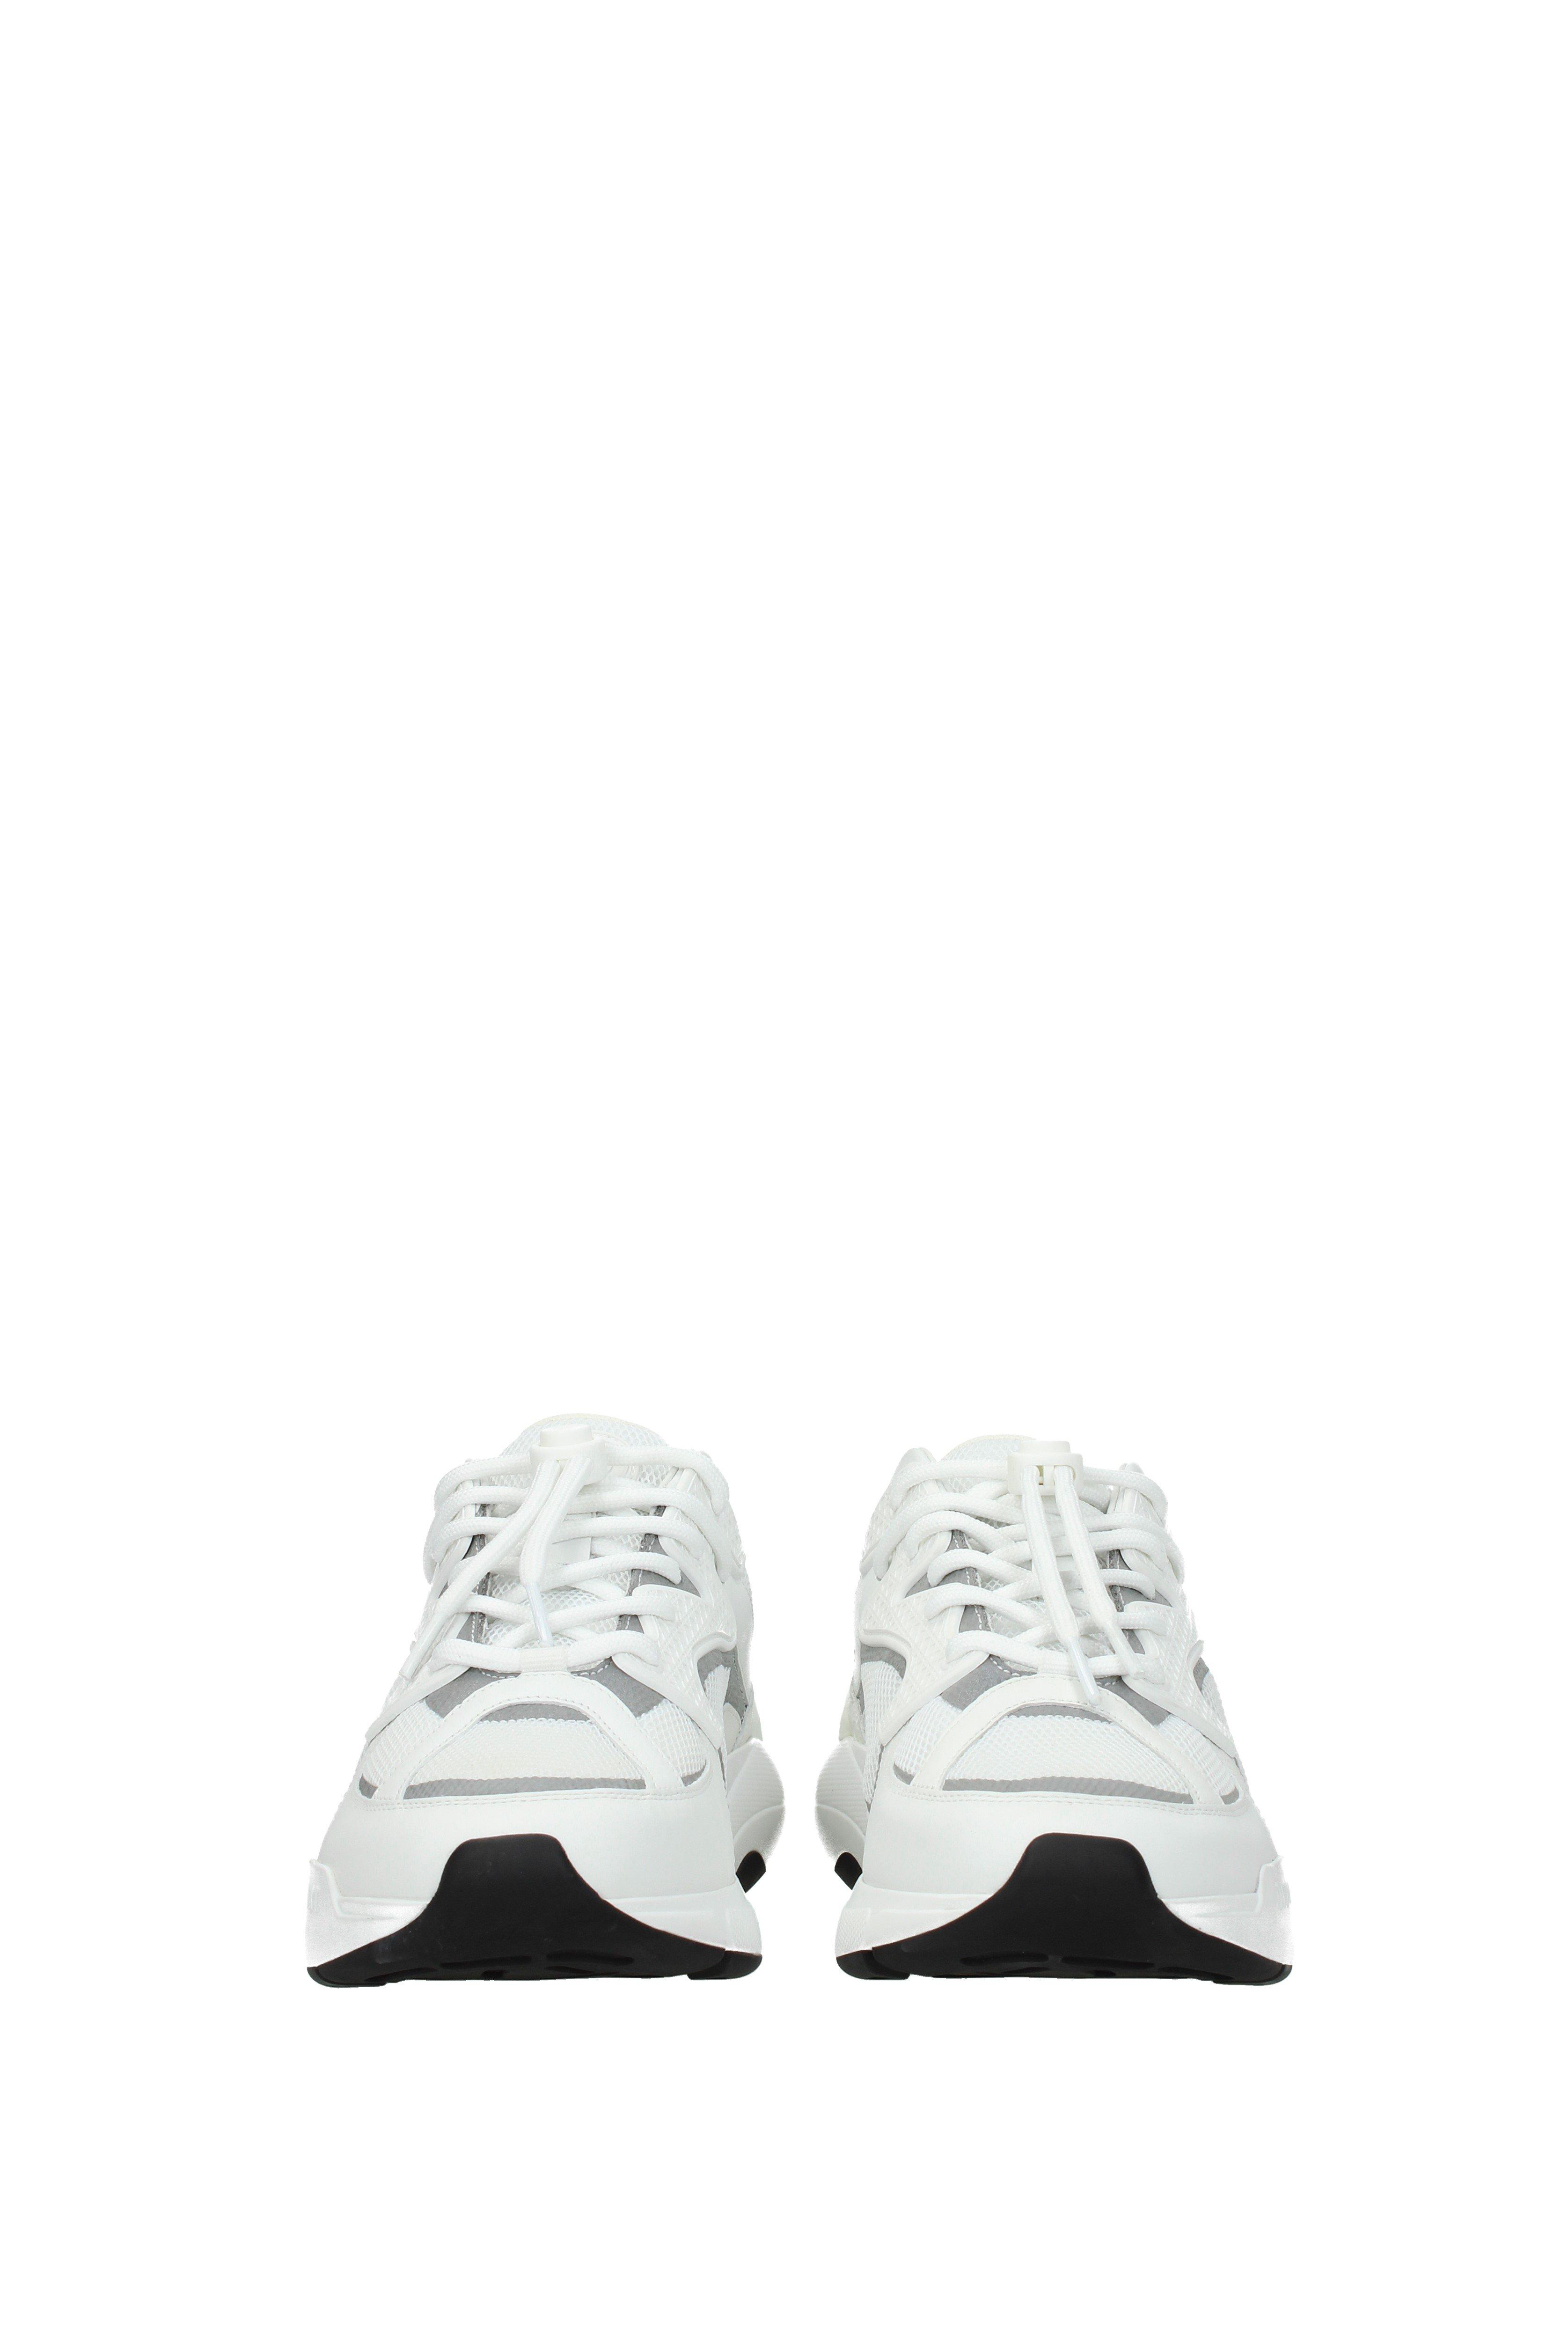 Dior White Sneakers for Men - Lyst